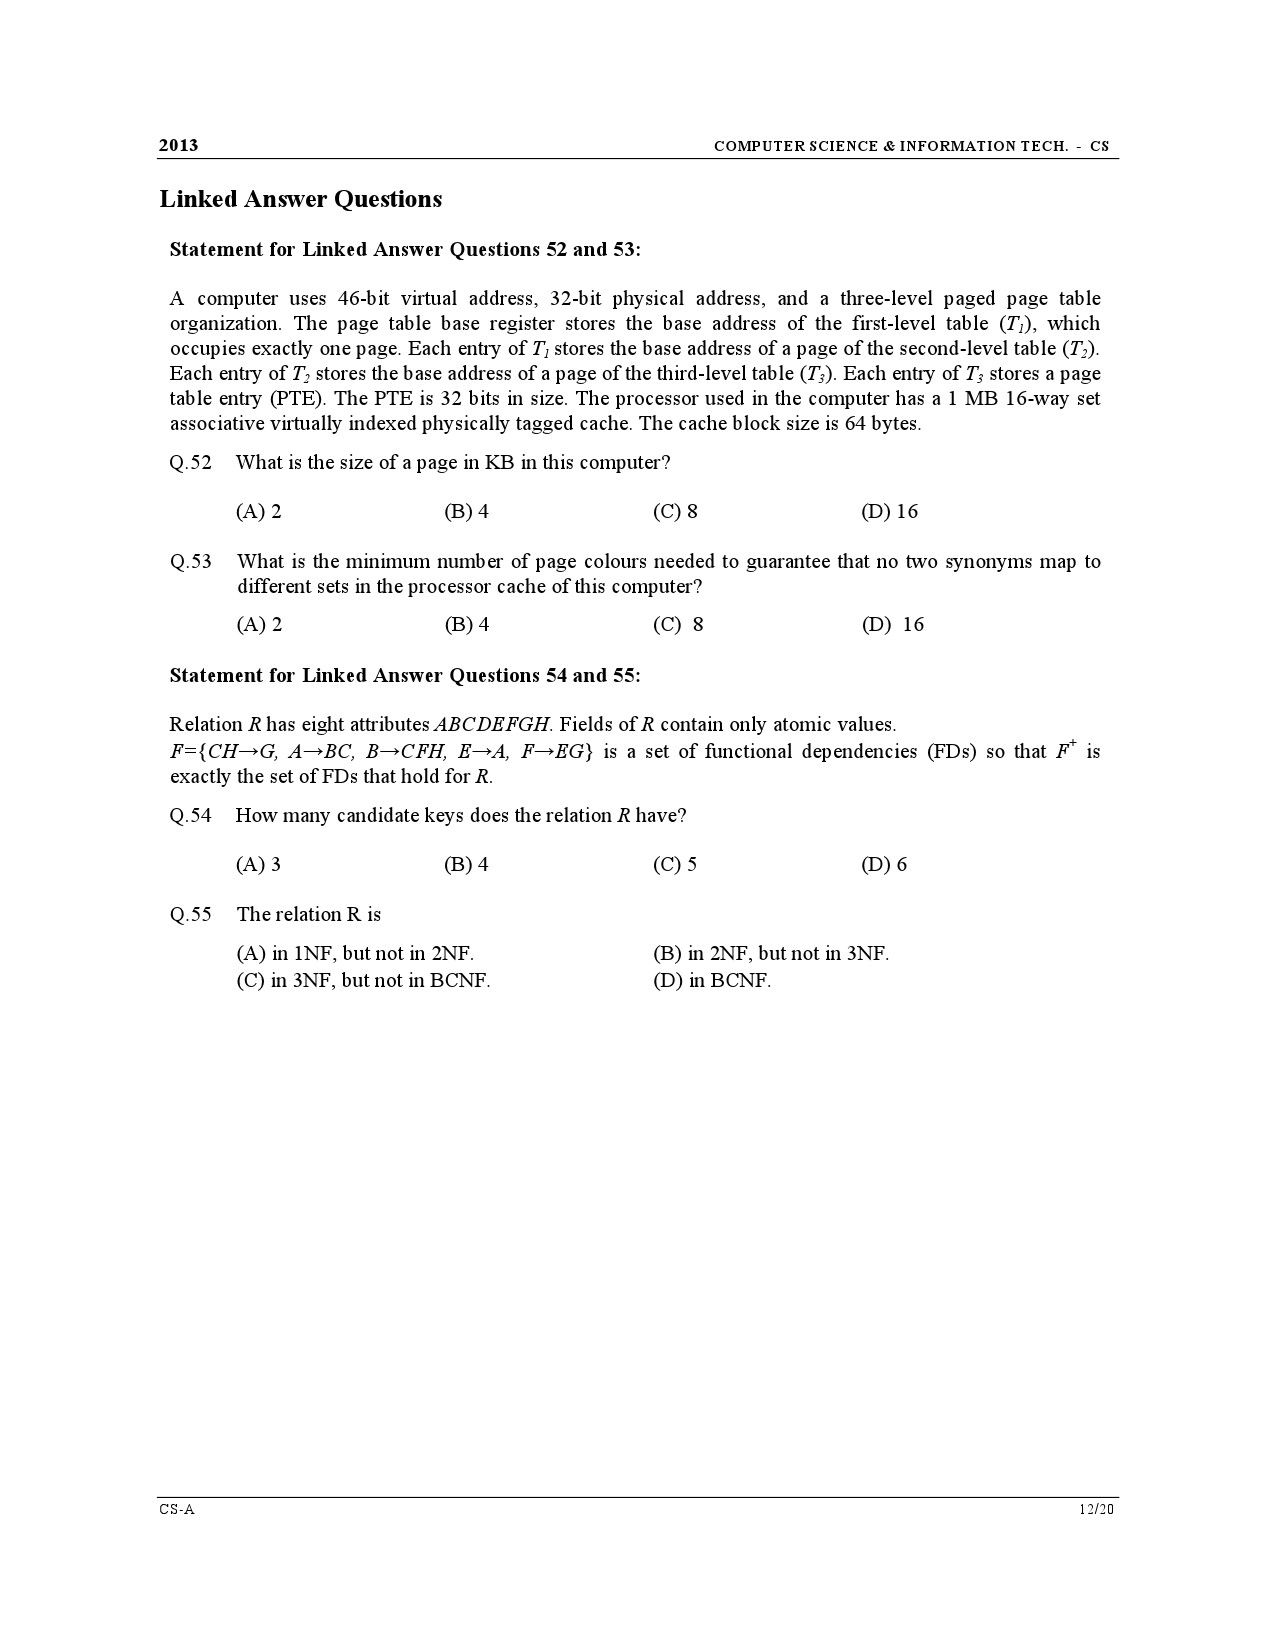 GATE Exam Question Paper 2013 Computer Science and Information Technology 12